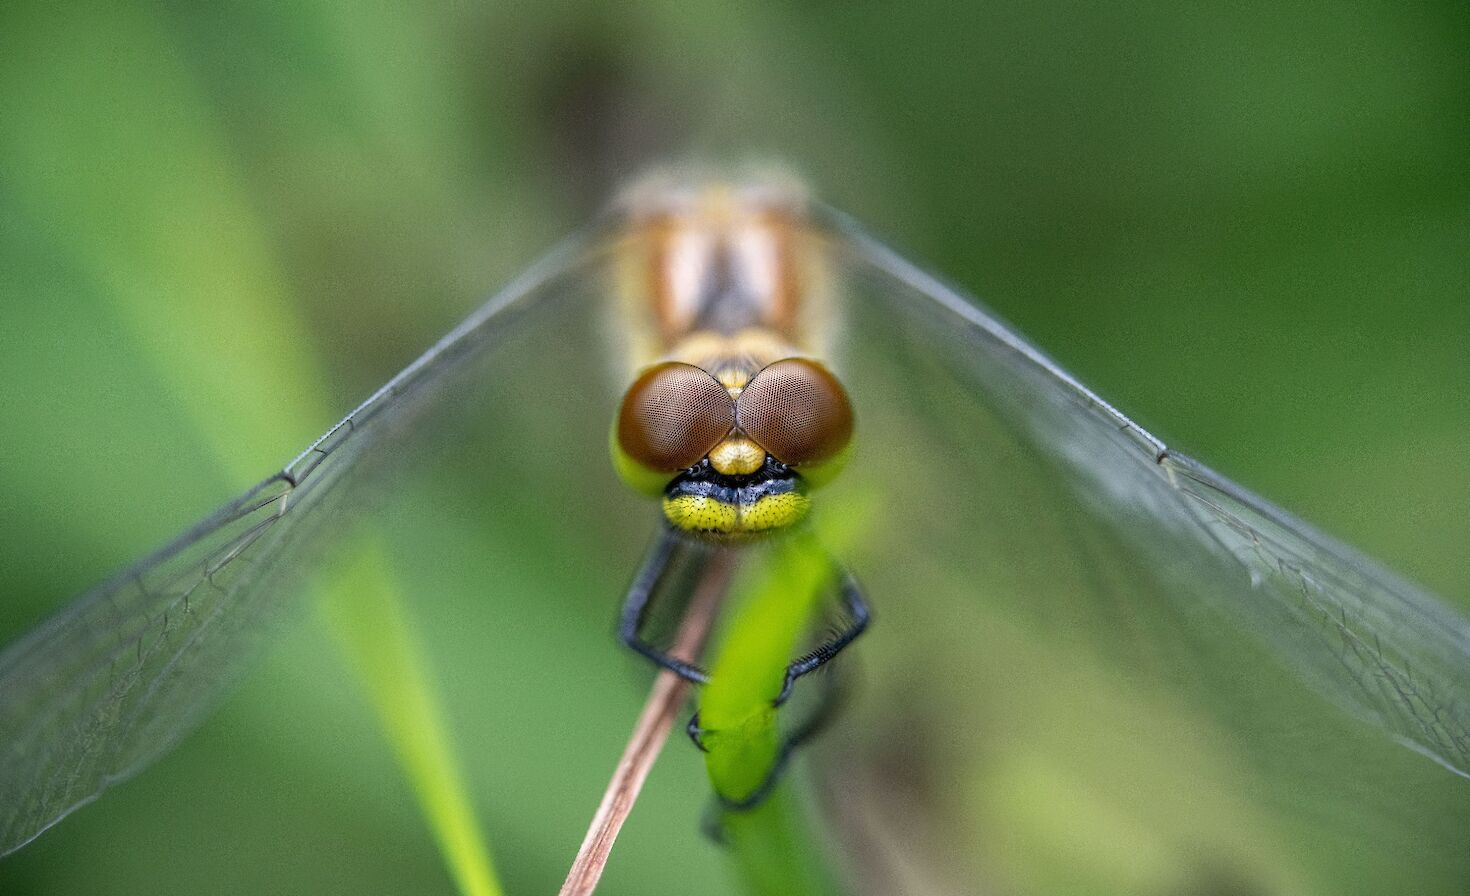 View of the compound eye of a dragonfly